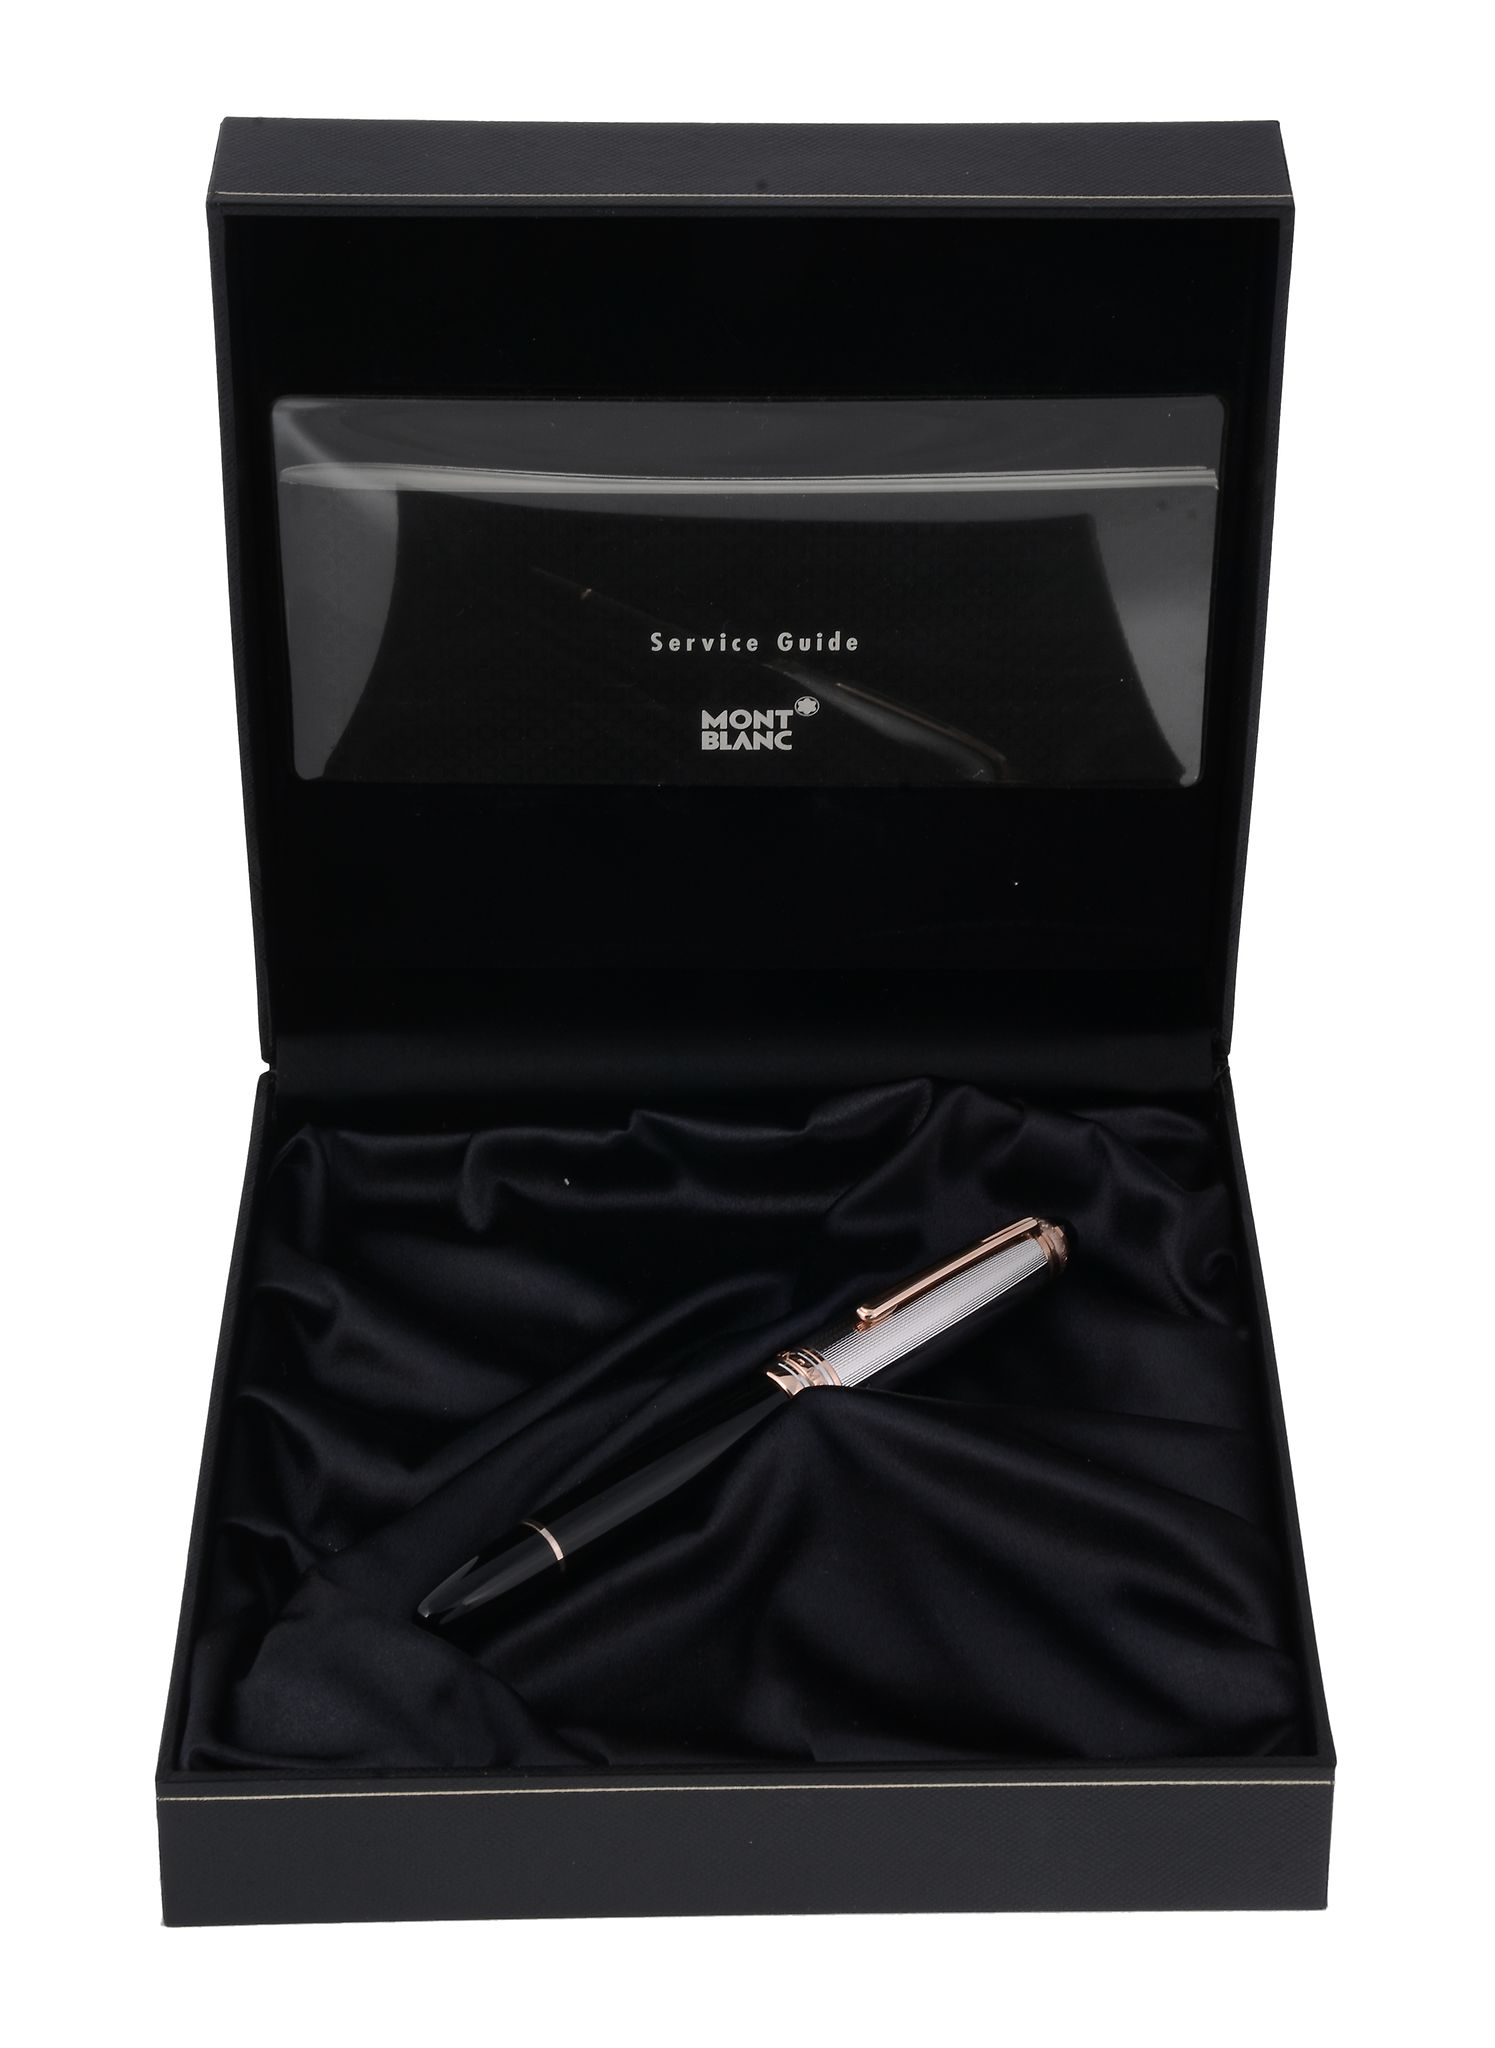 Montblanc, Meisterstuck 1924, 75th Anniversary limited edition fountain pen, no  Montblanc, - Image 3 of 3